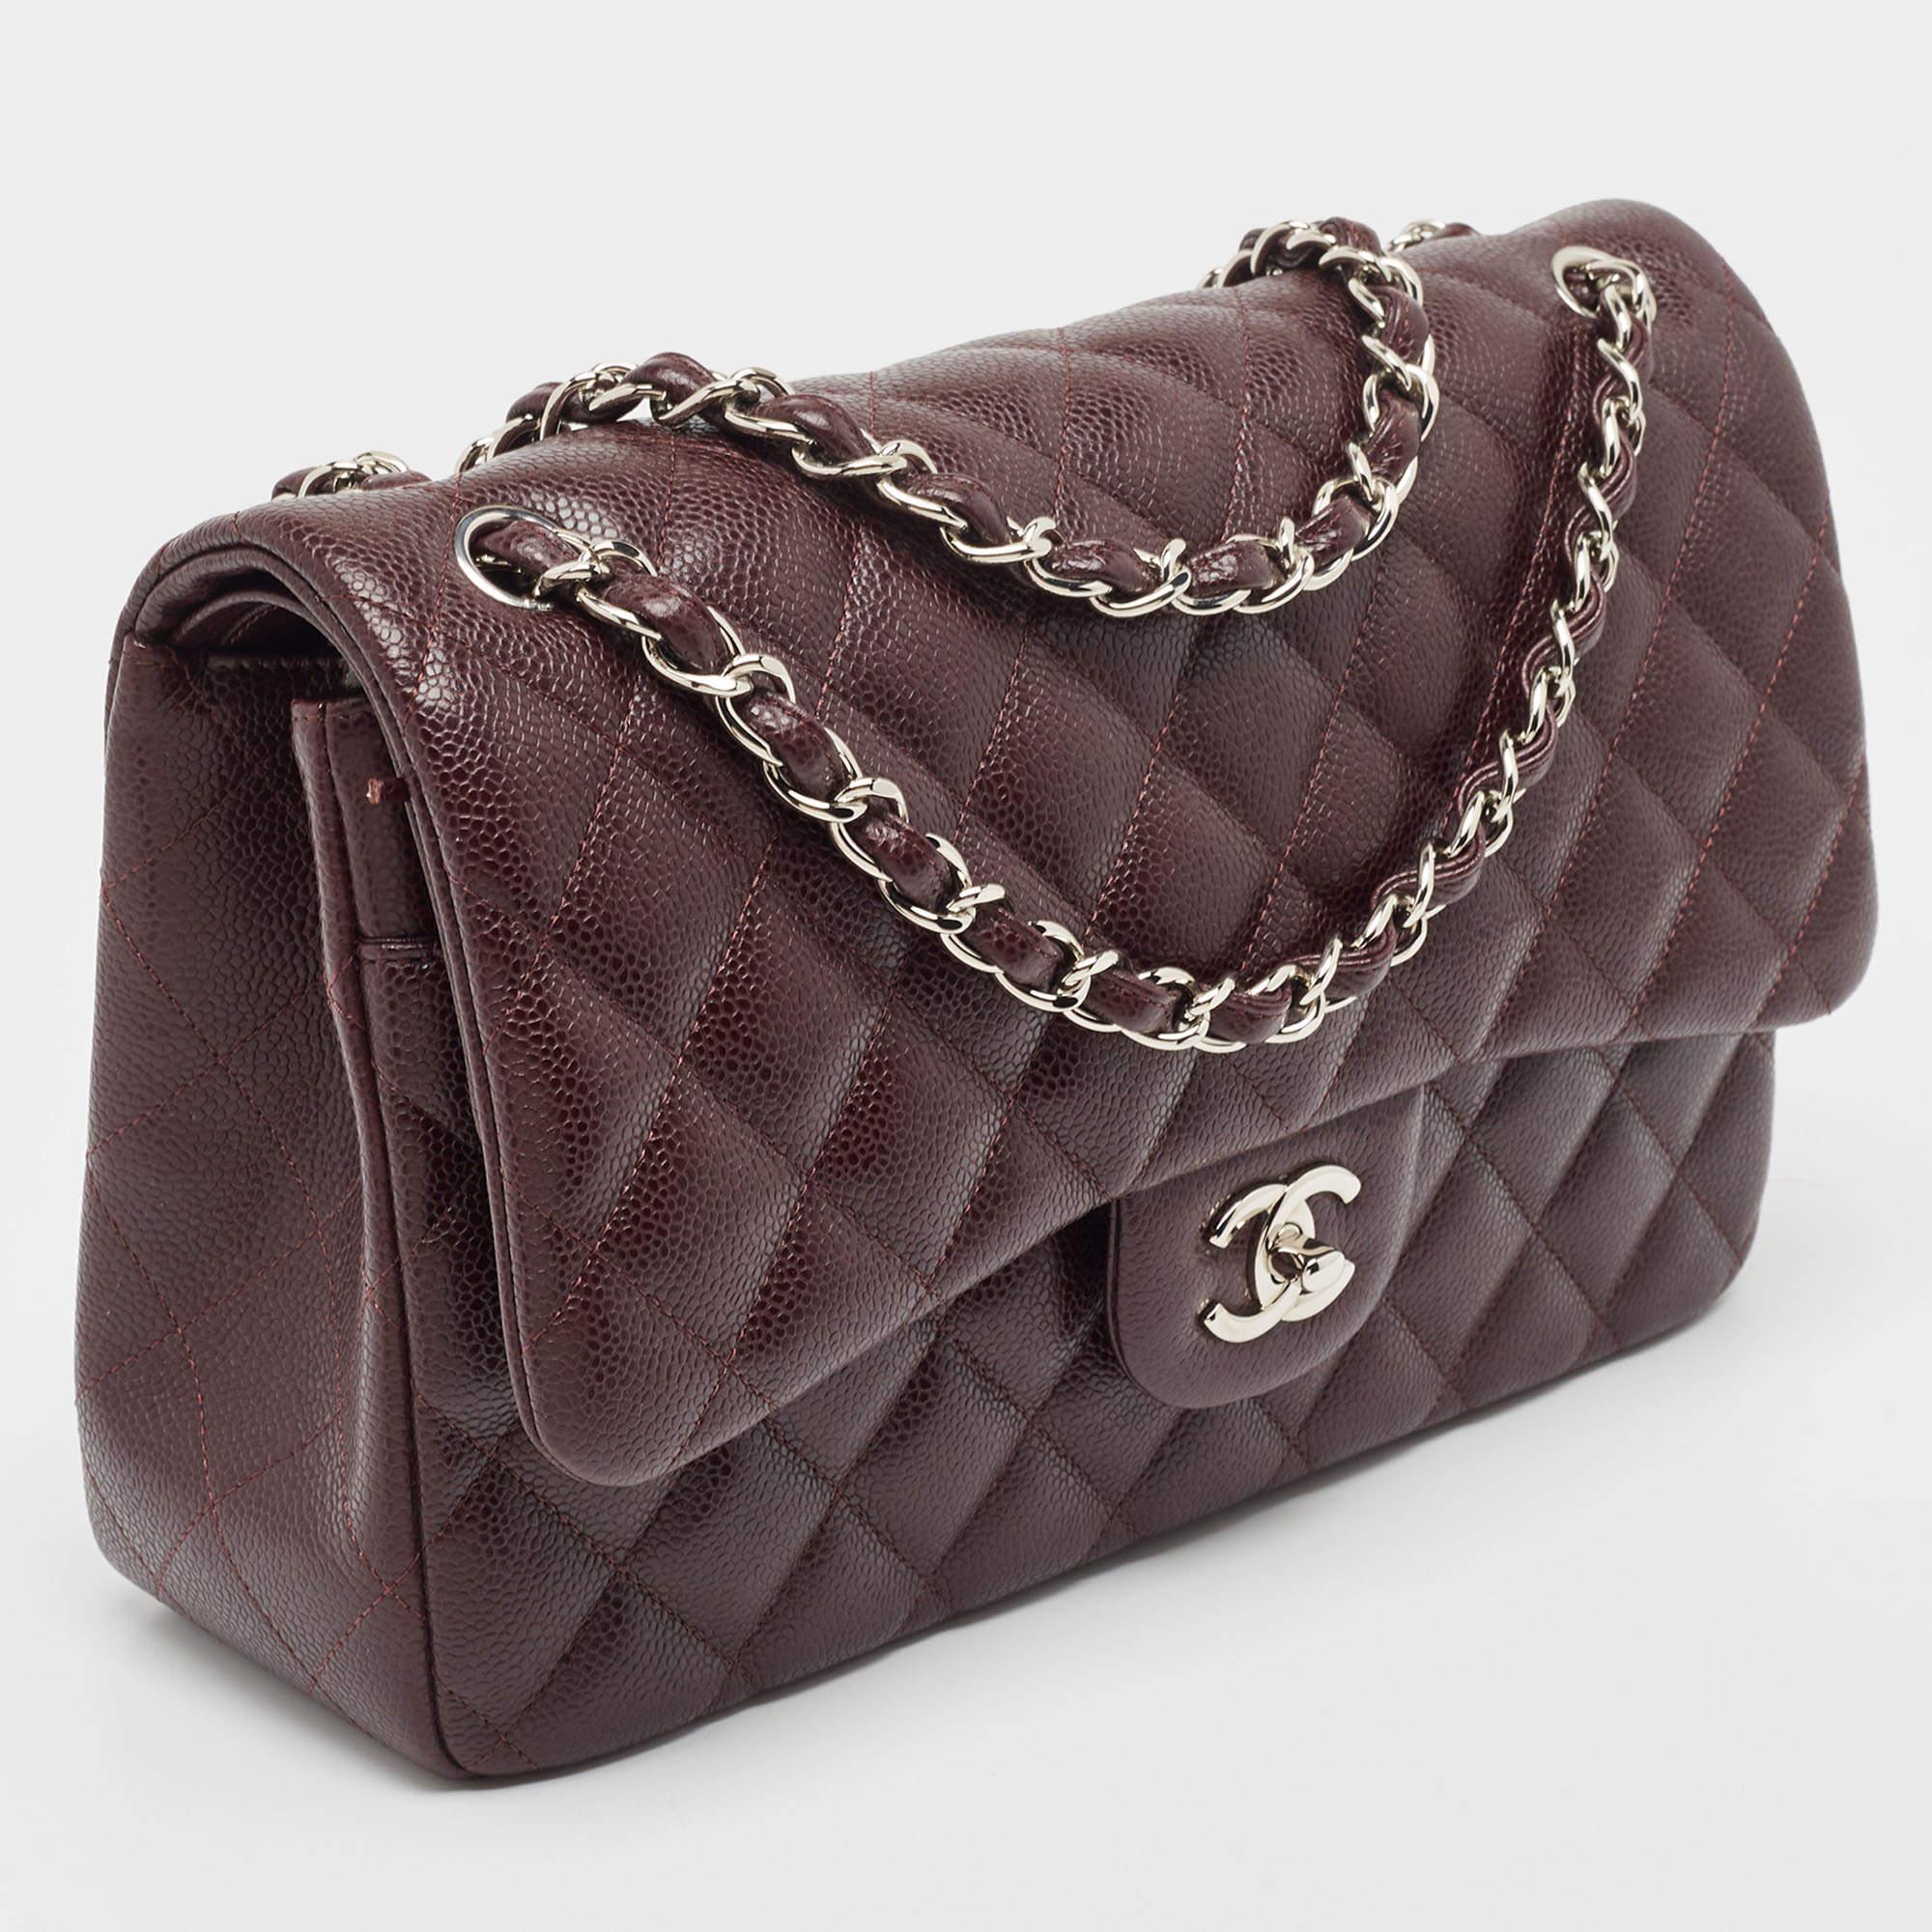 Perfect for conveniently housing your essentials in one place, this Chanel Jumbo Classic Double Flap bag is a worthy investment. It has notable details and offers a look of luxury.

